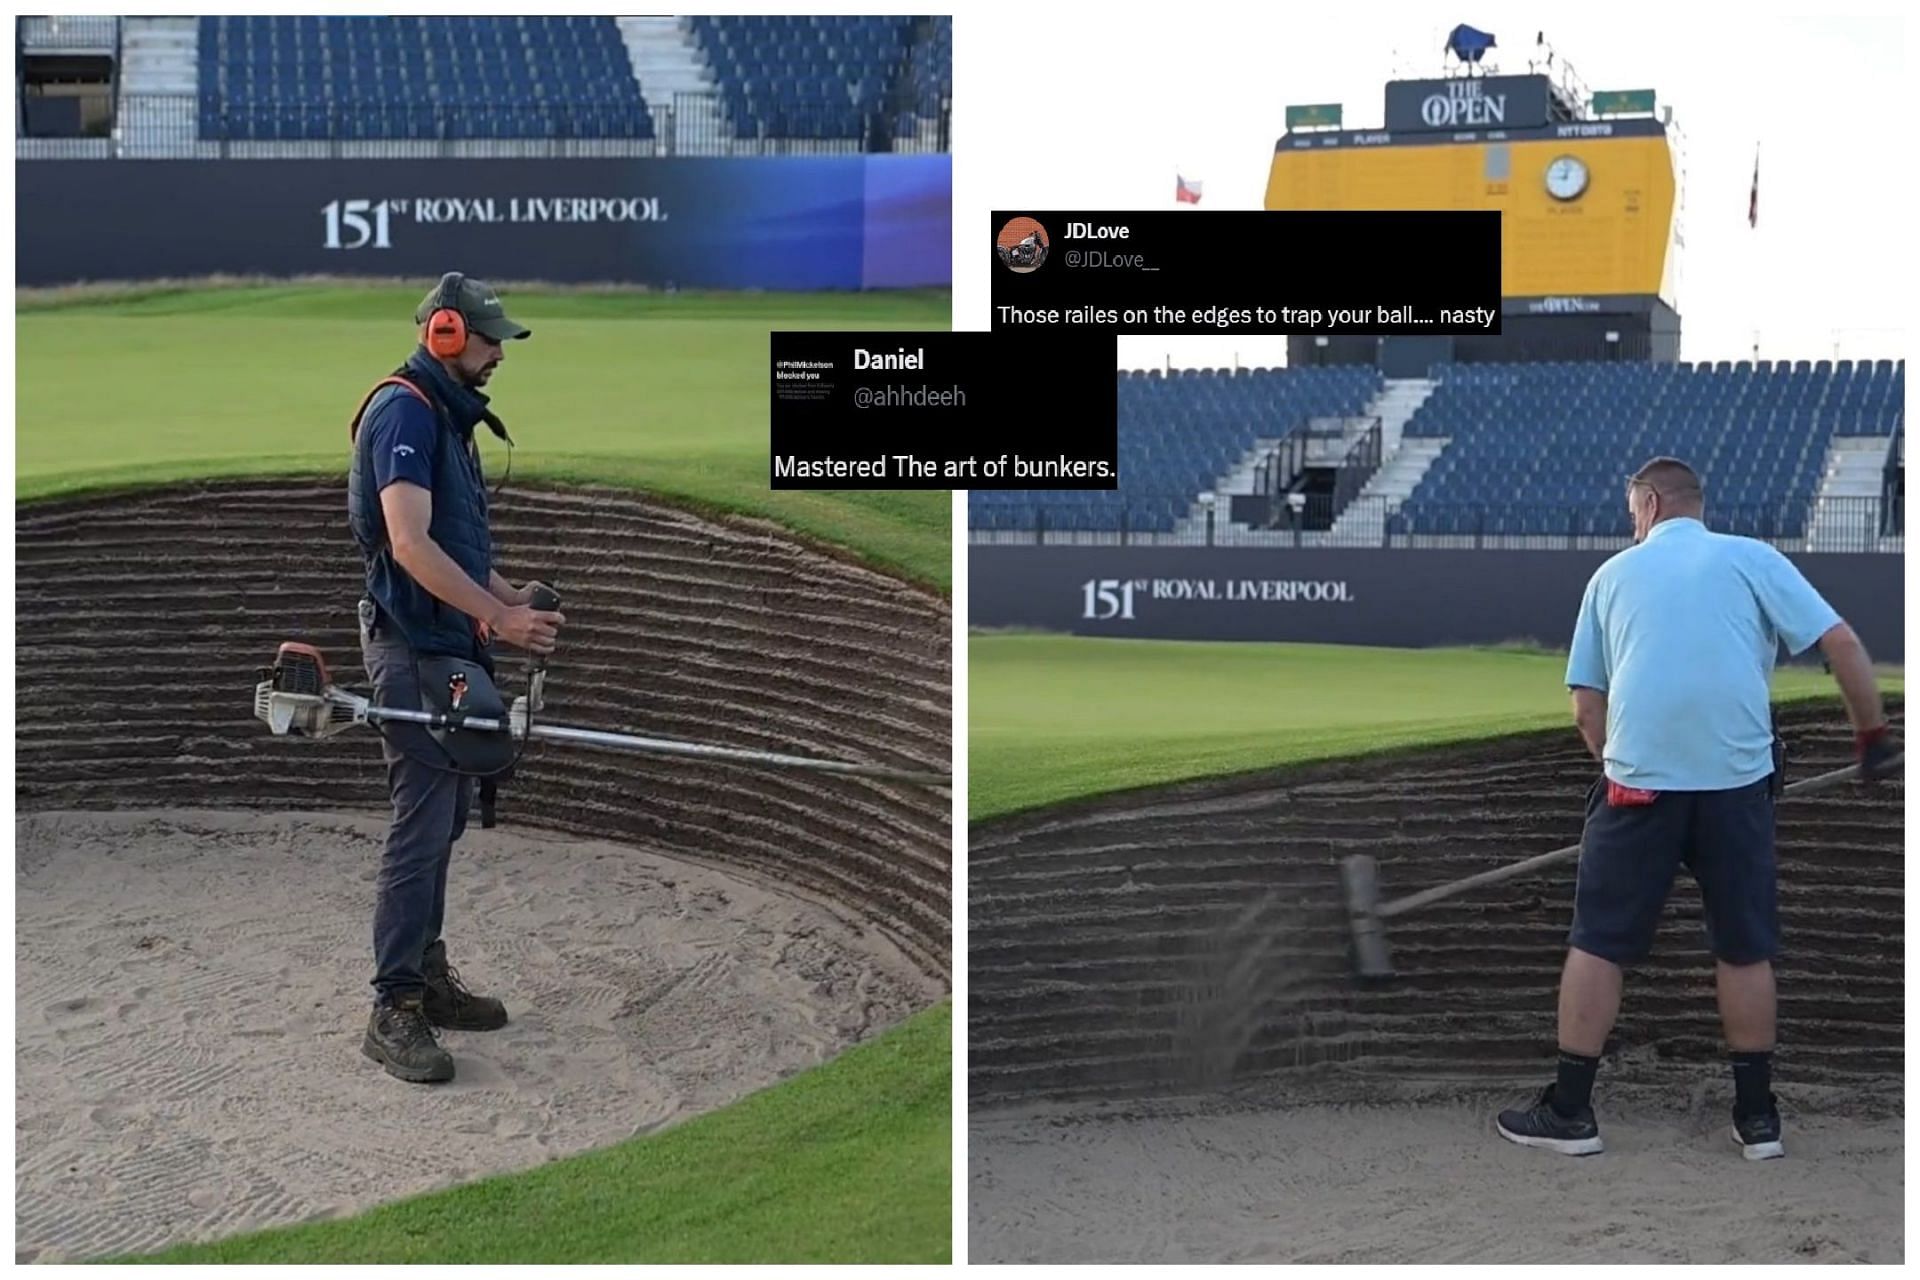 The Royal Liverpool prepares the 17th hole ahead of the 151st Open (Image via Twitter.com/PGATour)